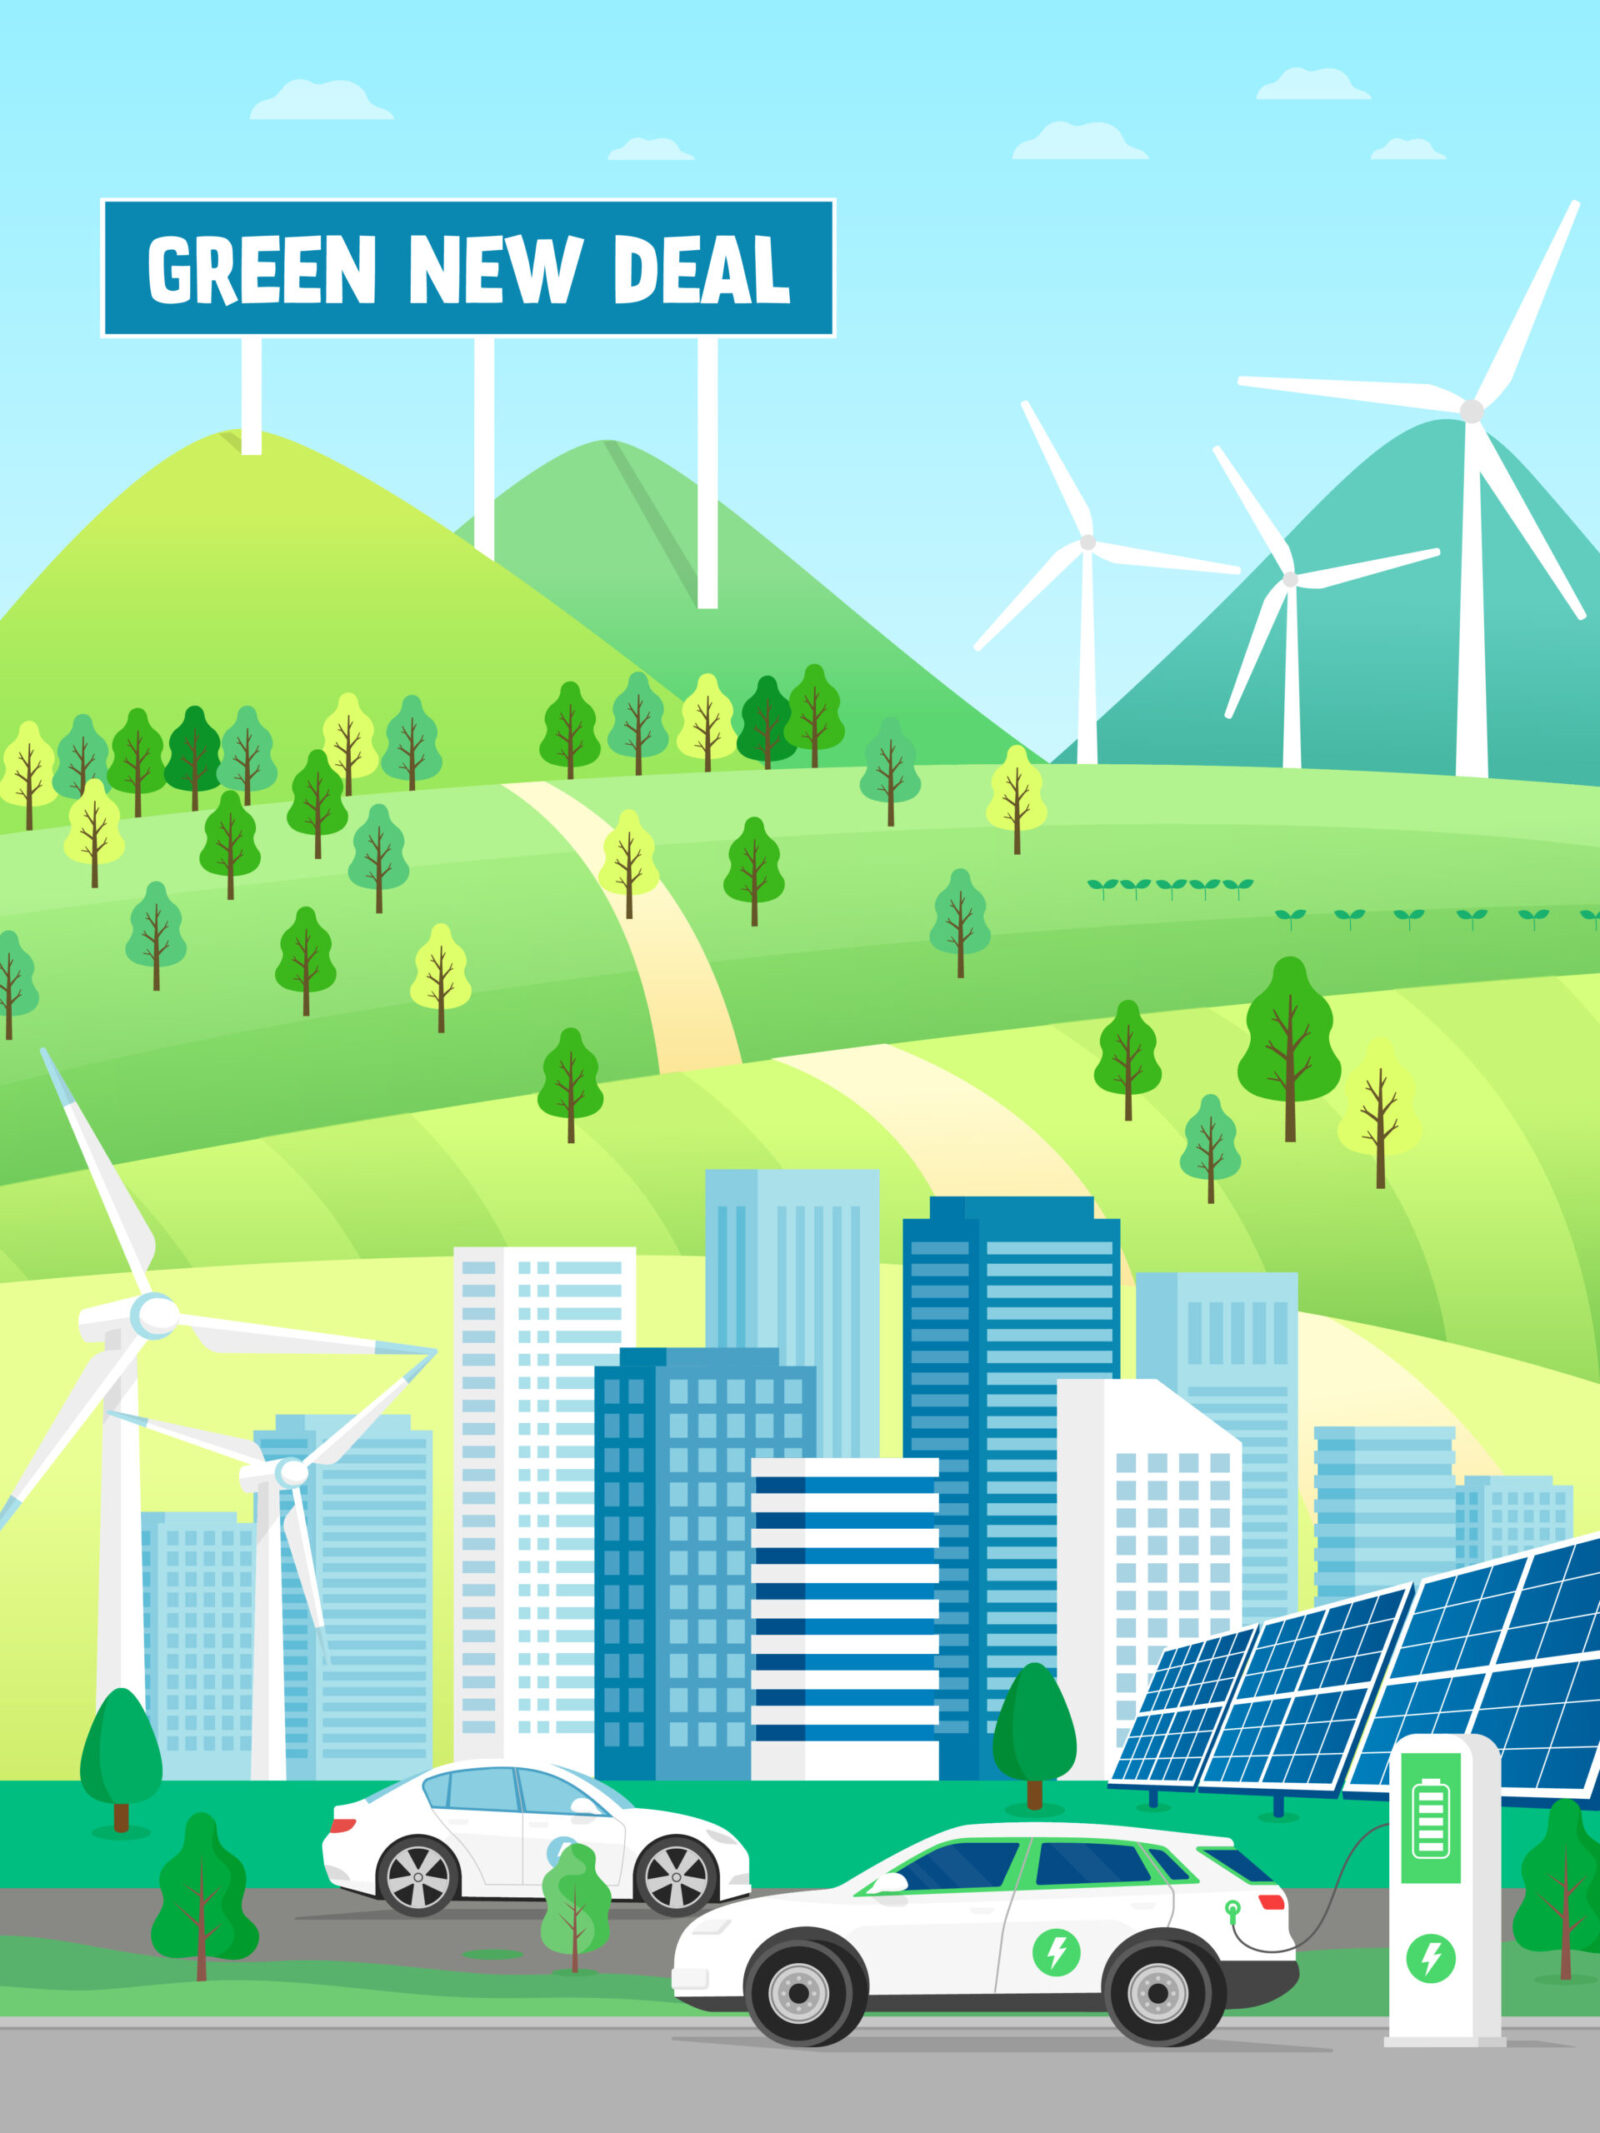 green new deal poster with wind turbines on green hills, tall buildings, and electric cars charging